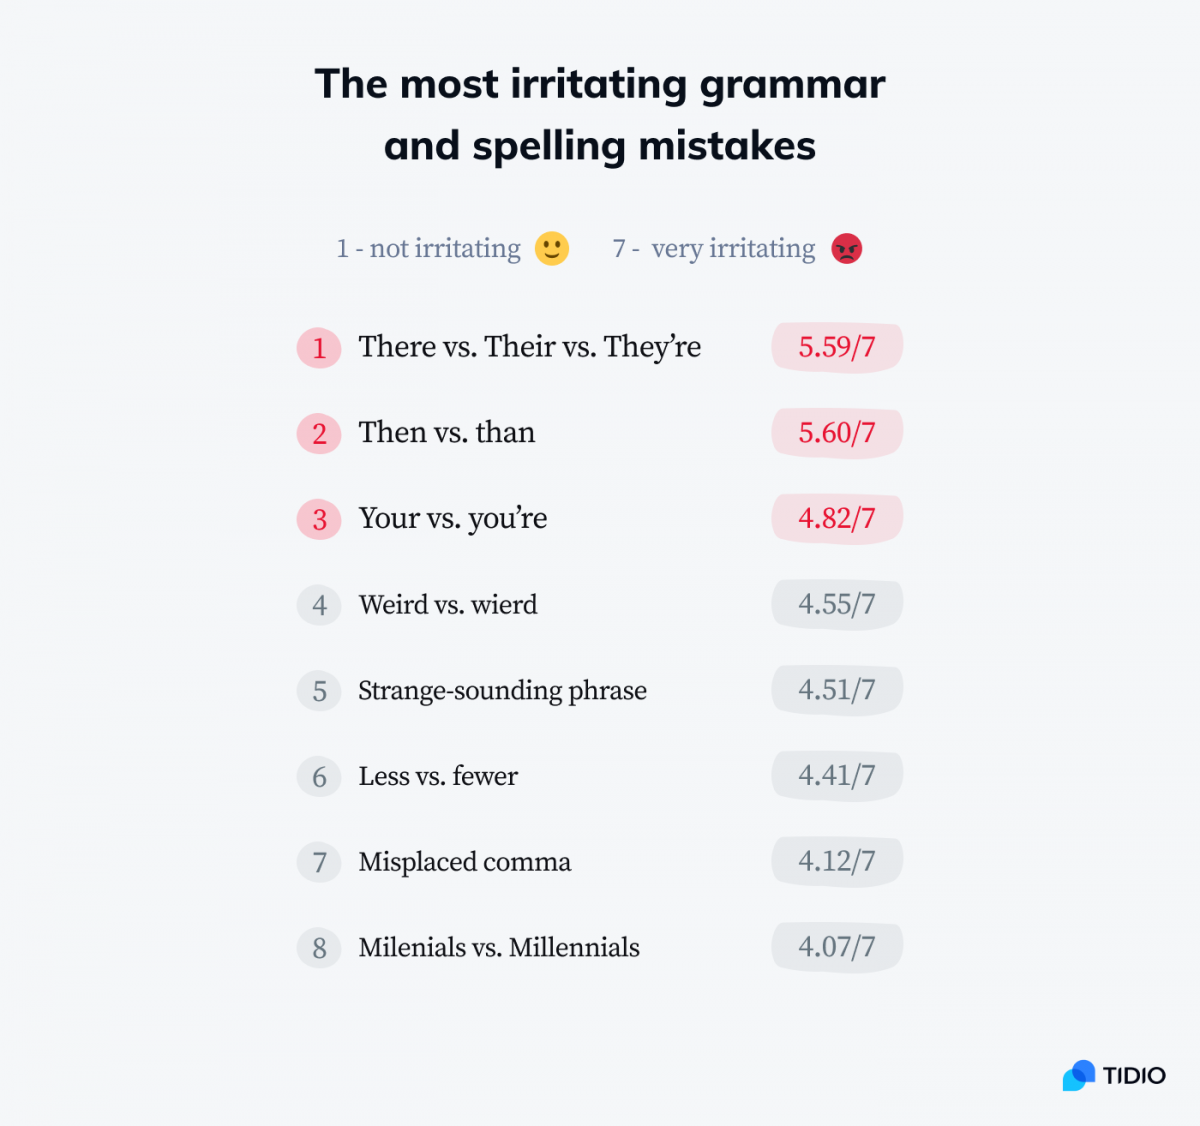 Infographic showing stats on the most irritating grammar and spelling mistakes